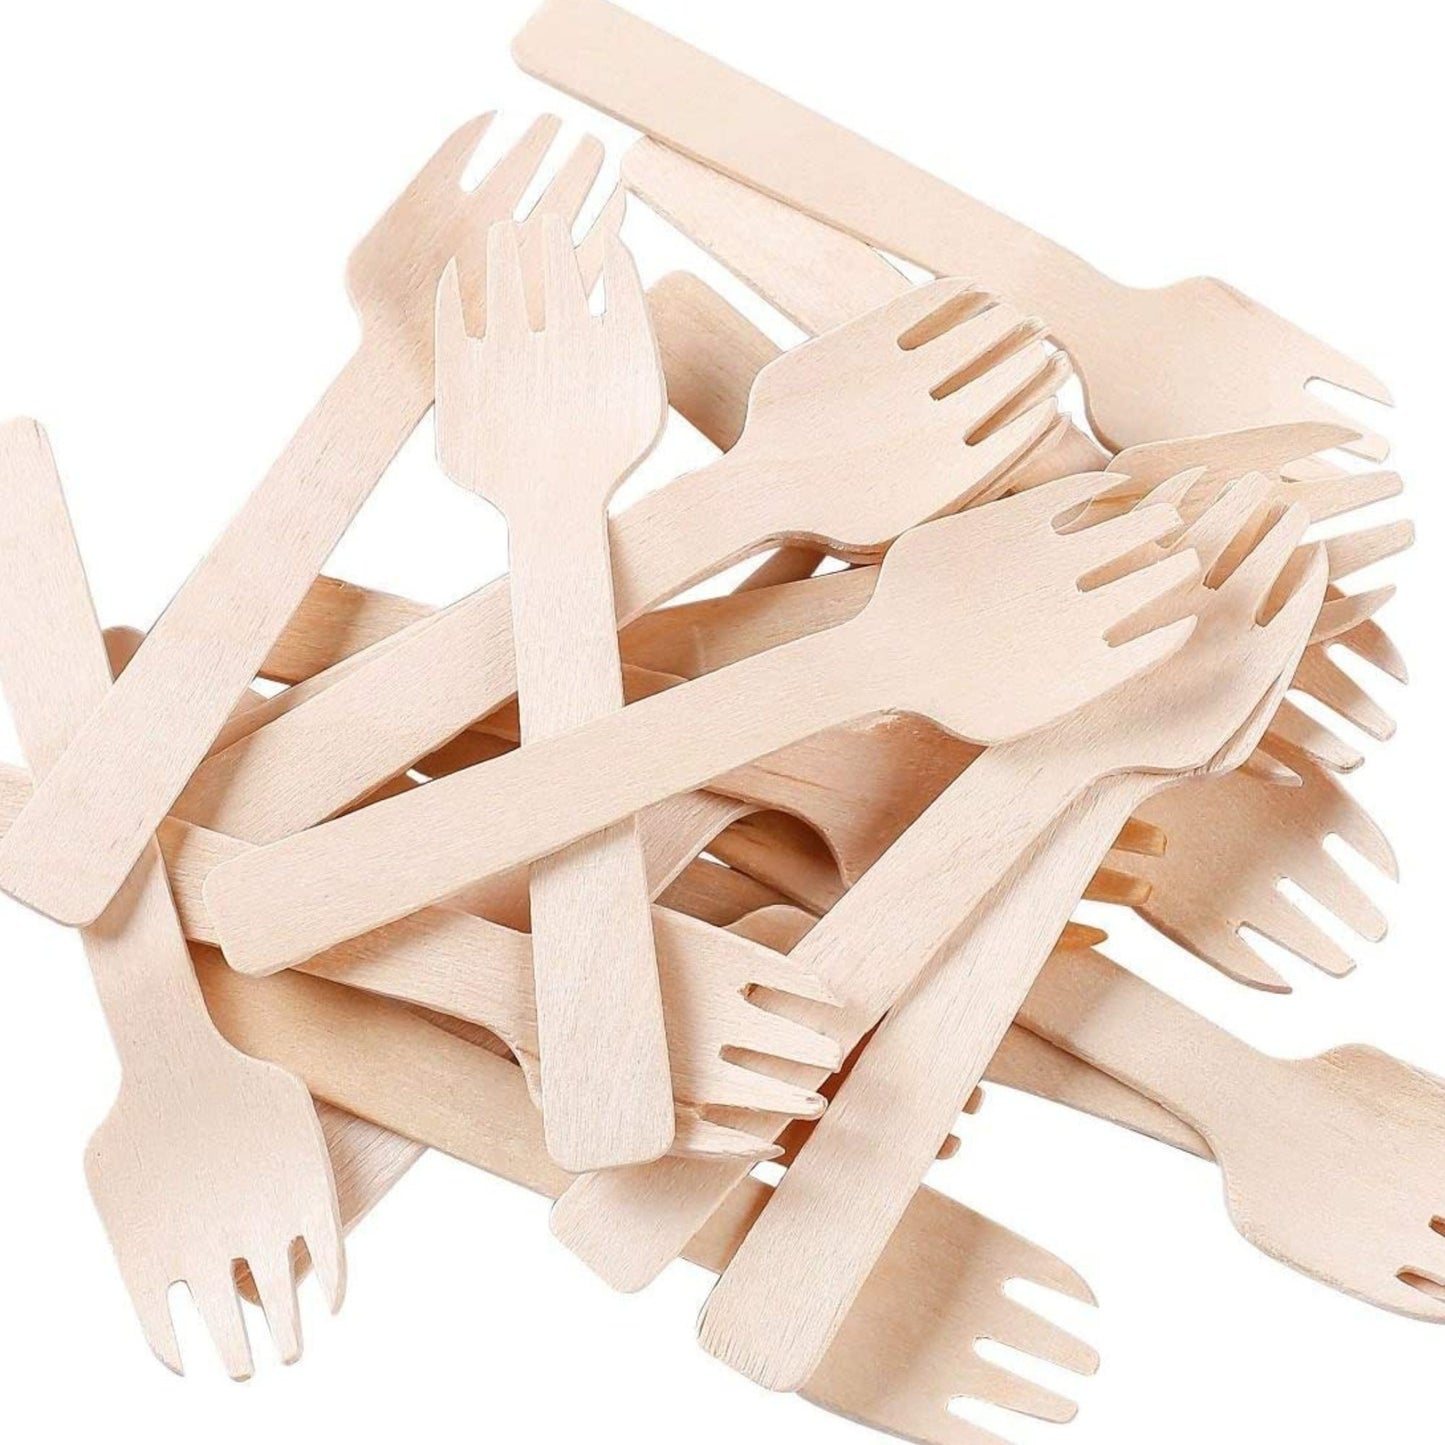 Wooden Forks & Spoons for Charcuterie Board